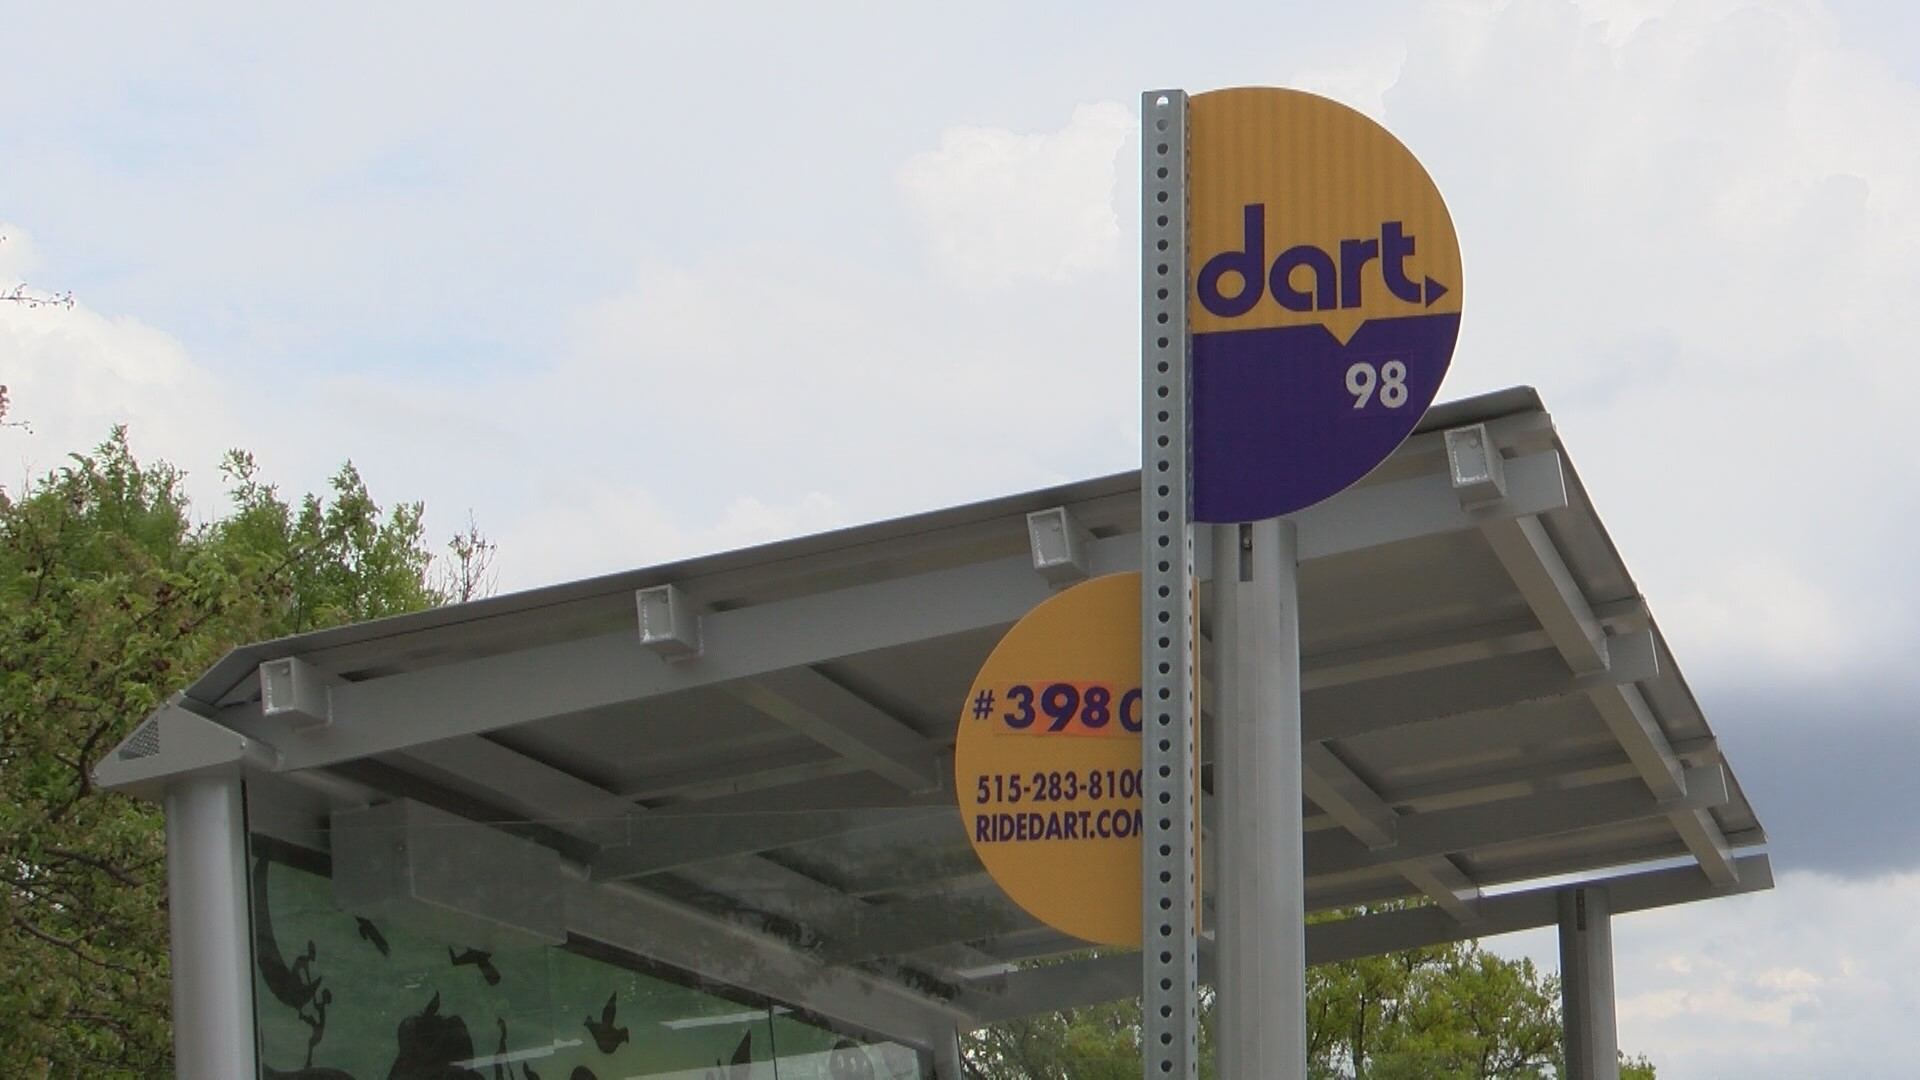 The city currently contributes $645,919 per year to DART, but less than 15 people have used the services in 2023.